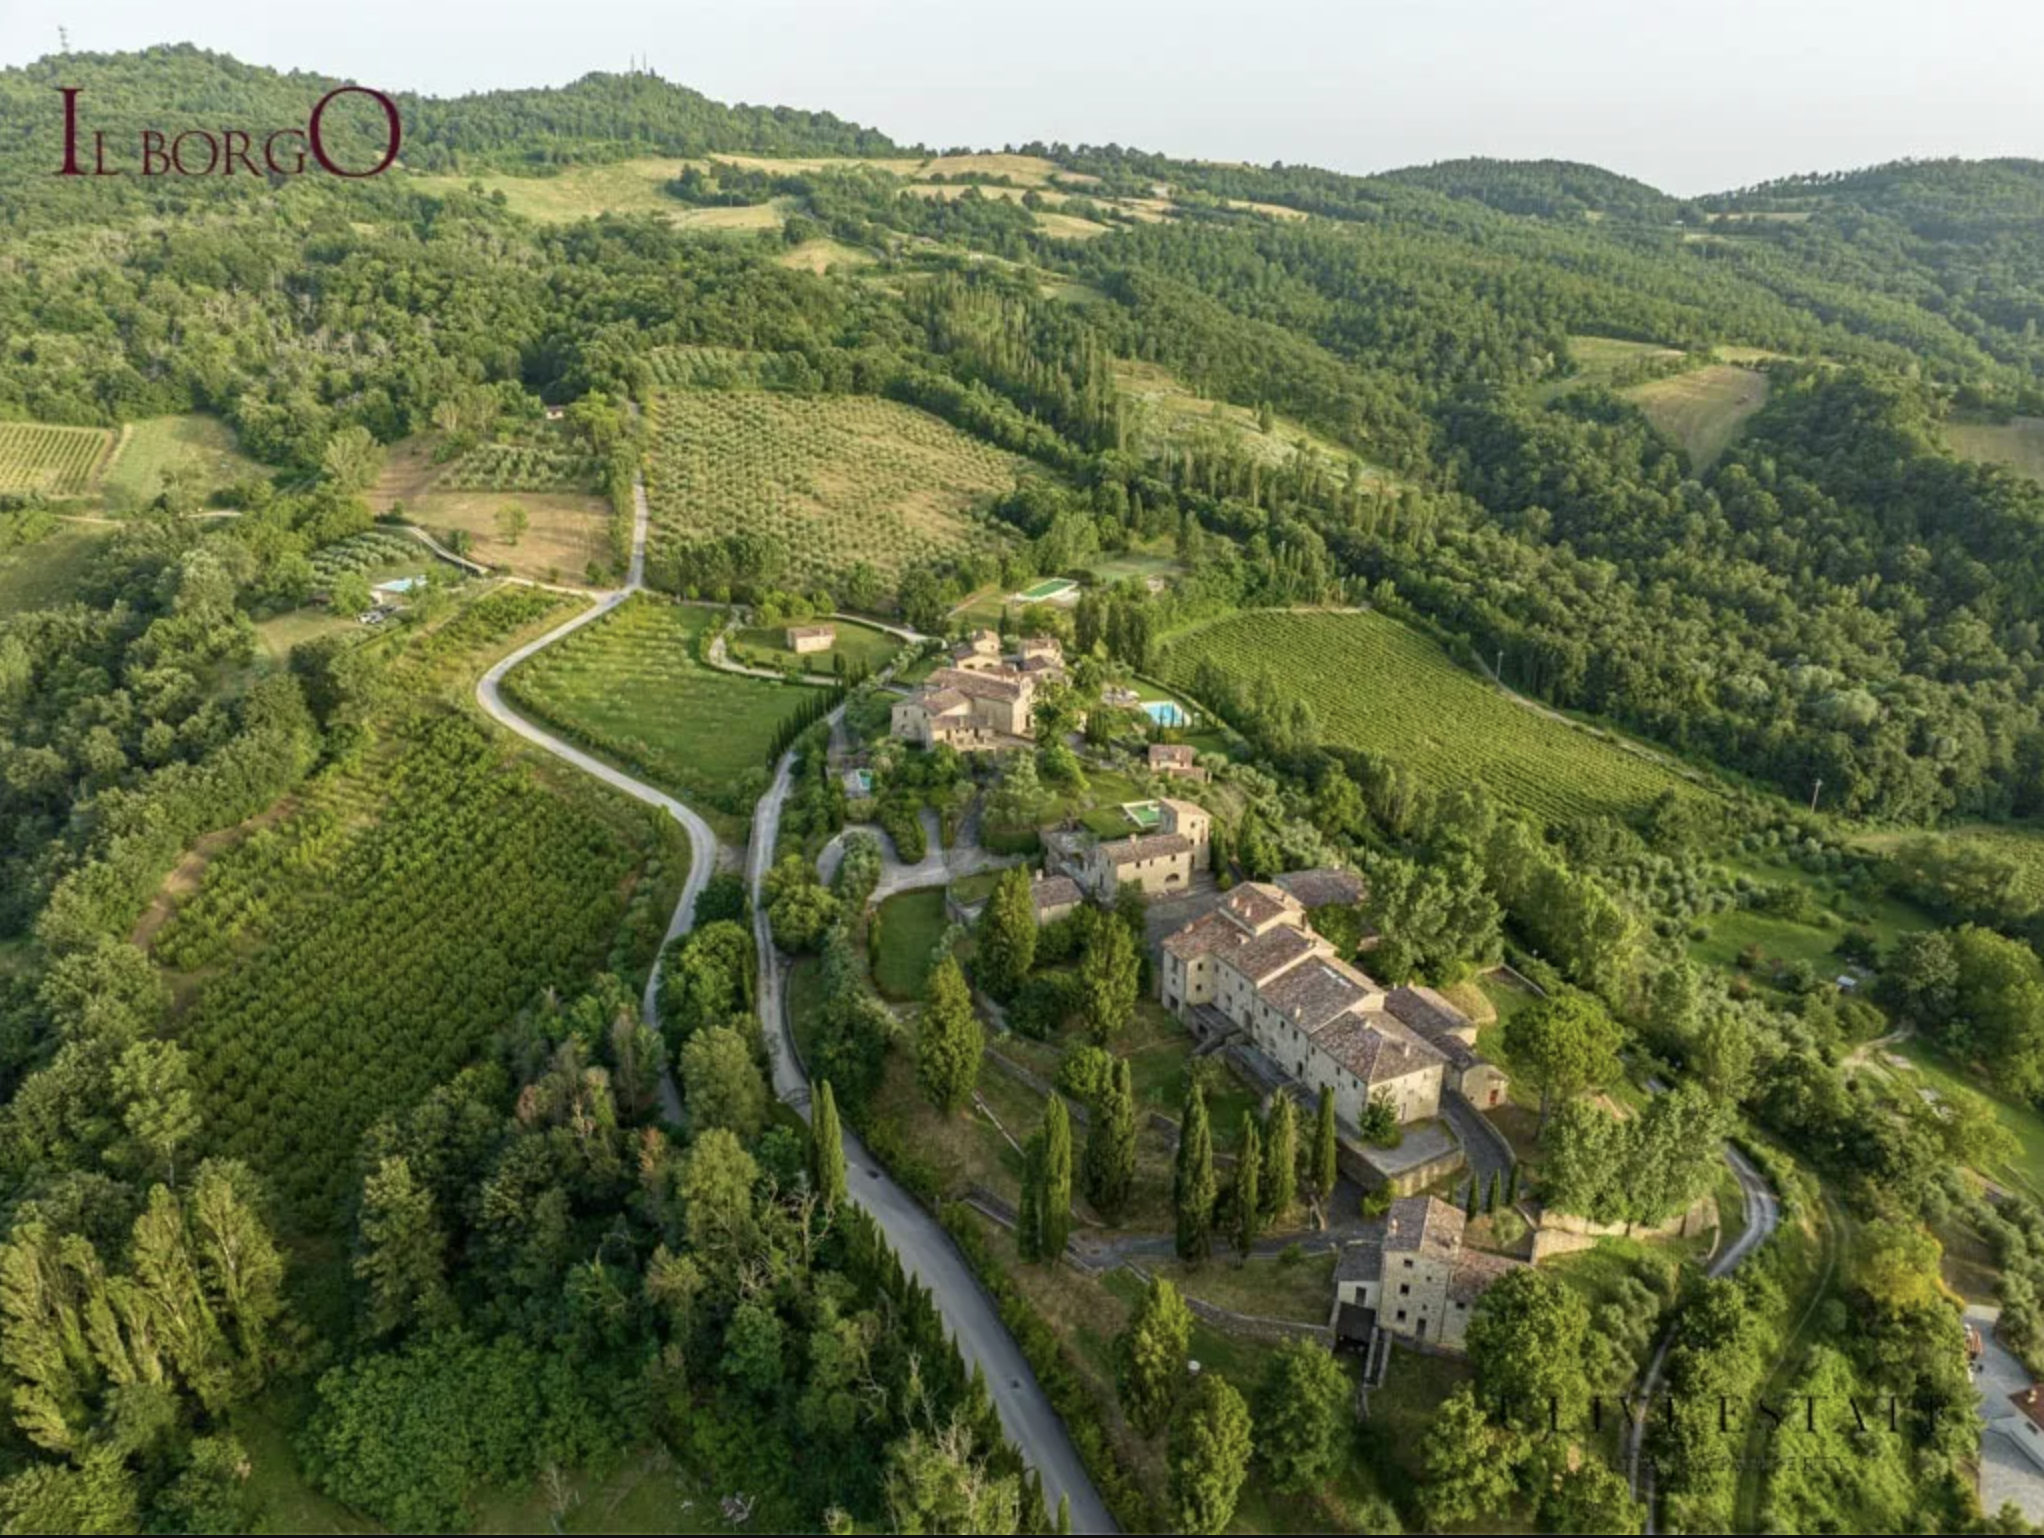 Francis York Borgo Pieve di Comunaglia in Umbria, Italy With 17 Country Houses, 1000-Year-Old Church, Vineyards 00005.png